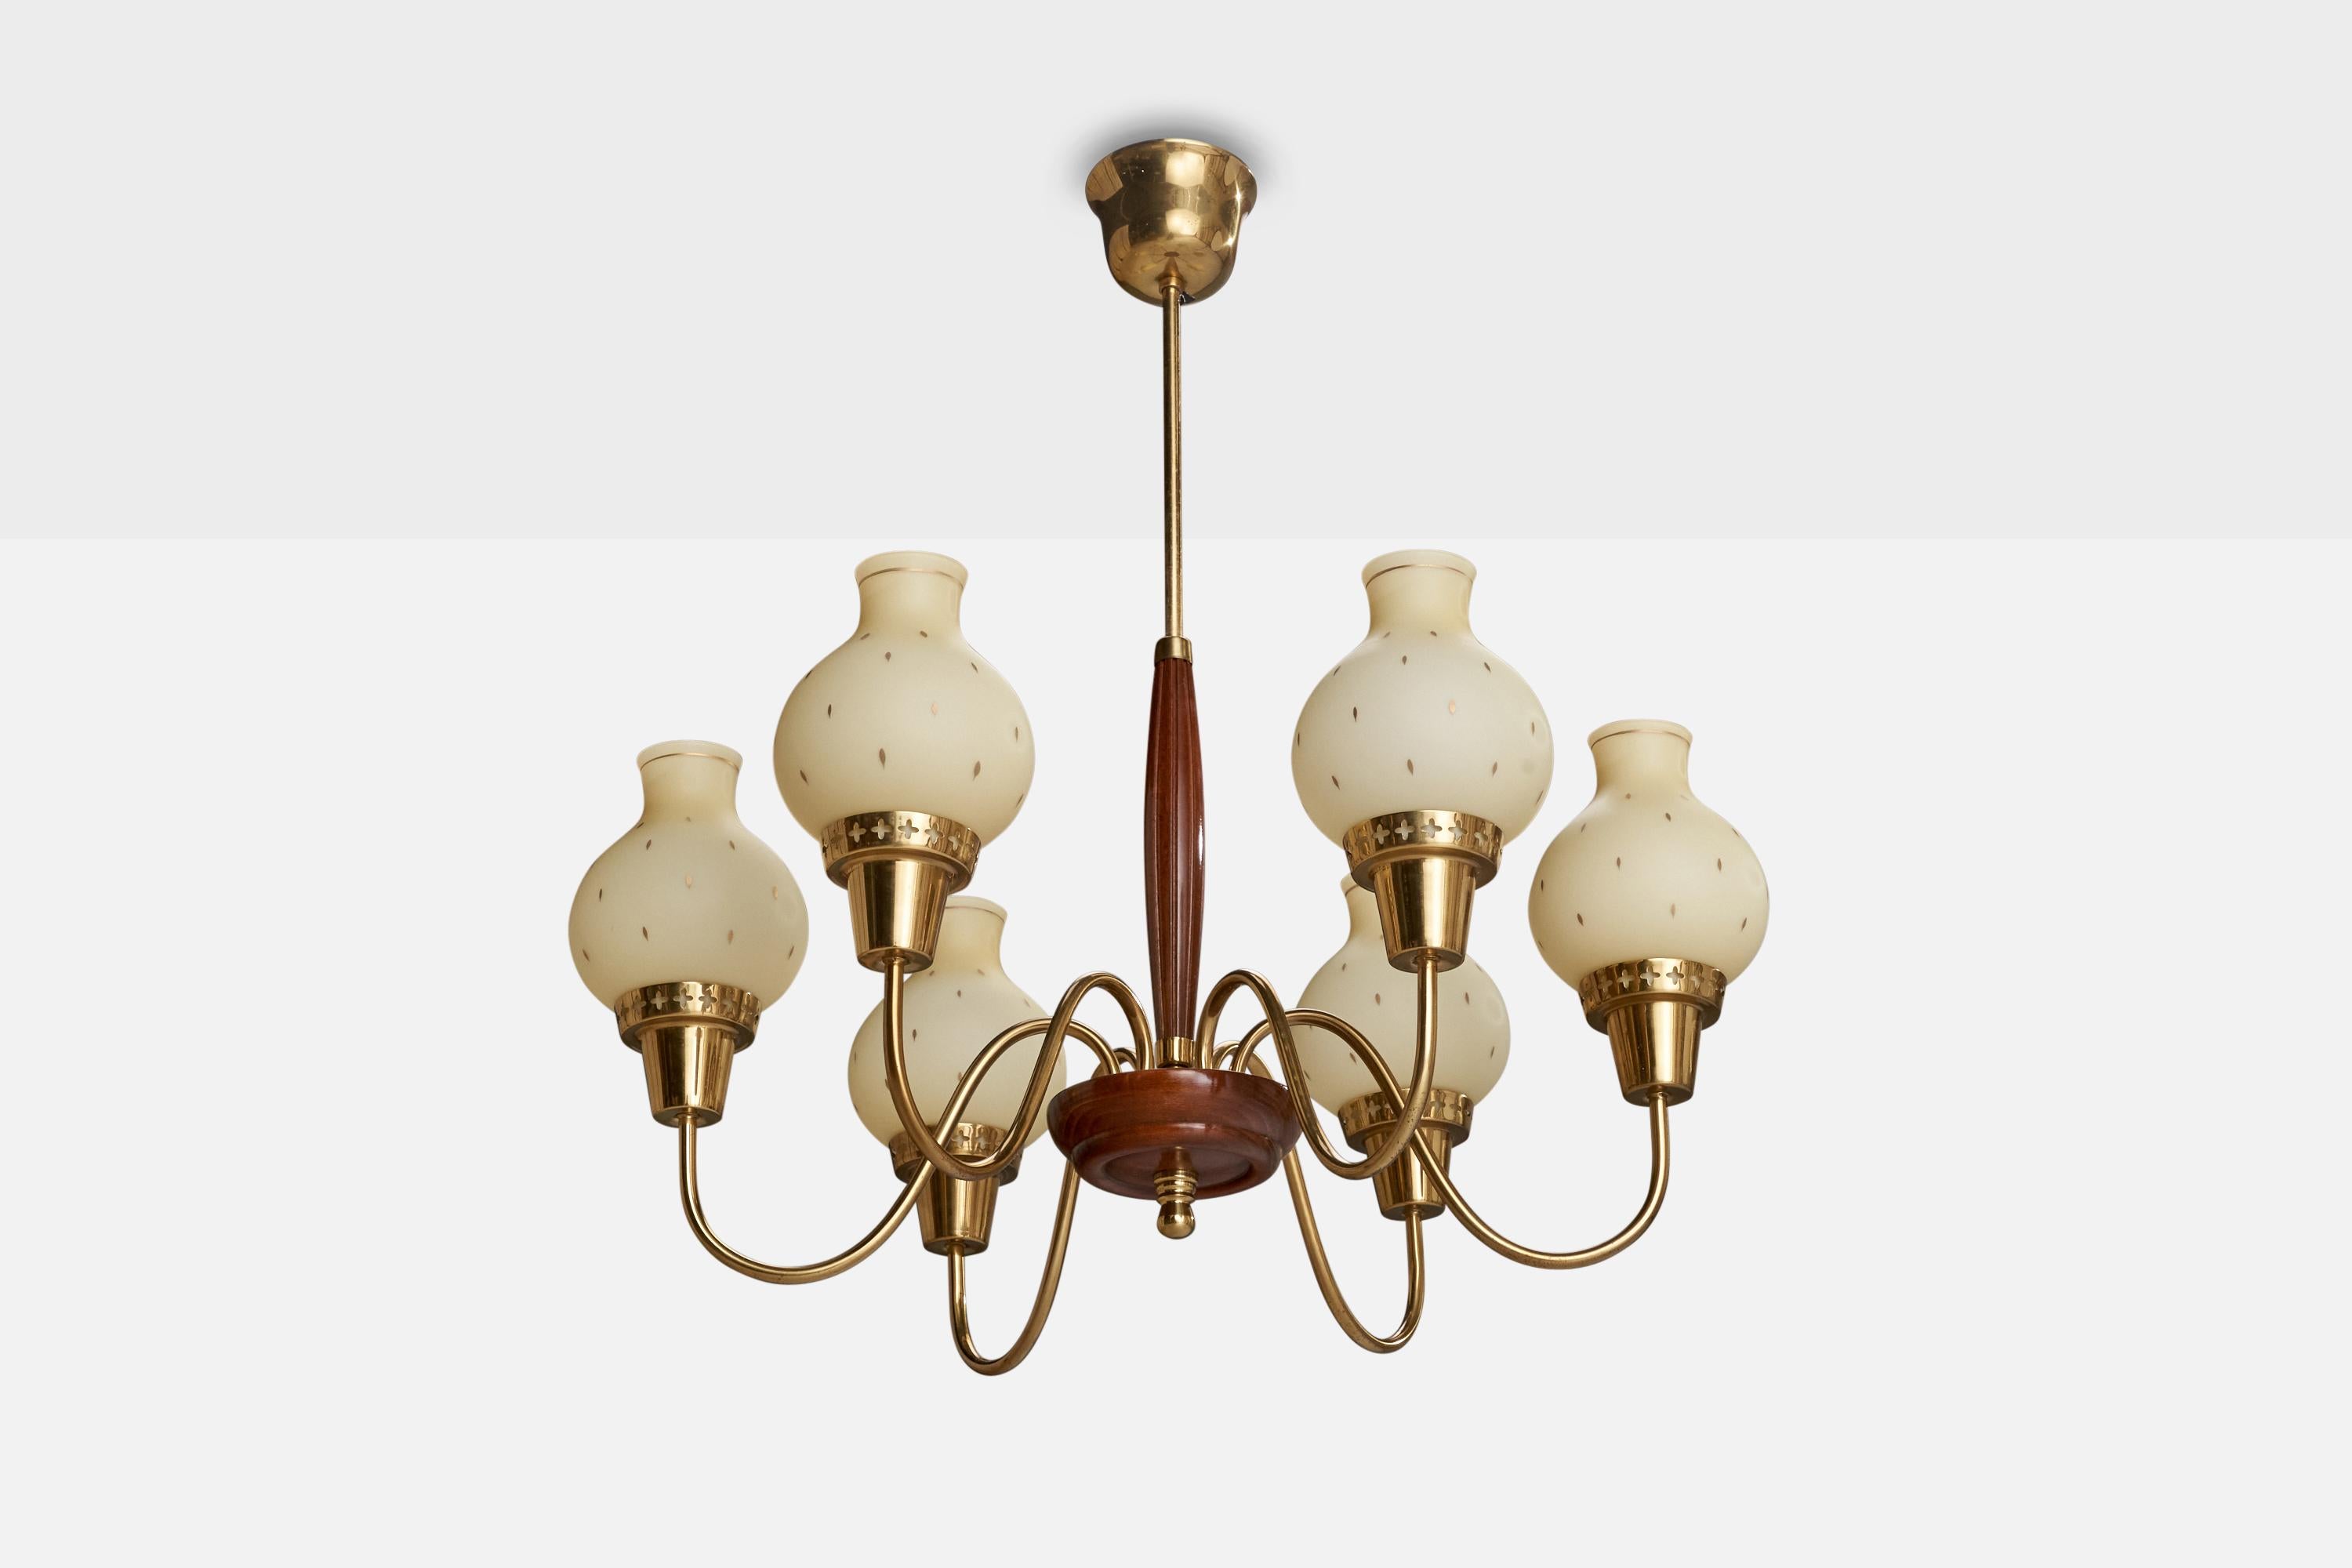 A brass, dark-stained wood and gilded opaline glass designed and produced in Sweden, c. 1940s.

Dimensions of canopy (inches): 3.9” H x 2.9” Diameter
Socket takes standard E-26 bulbs. 6 socket.There is no maximum wattage stated on the fixture. All